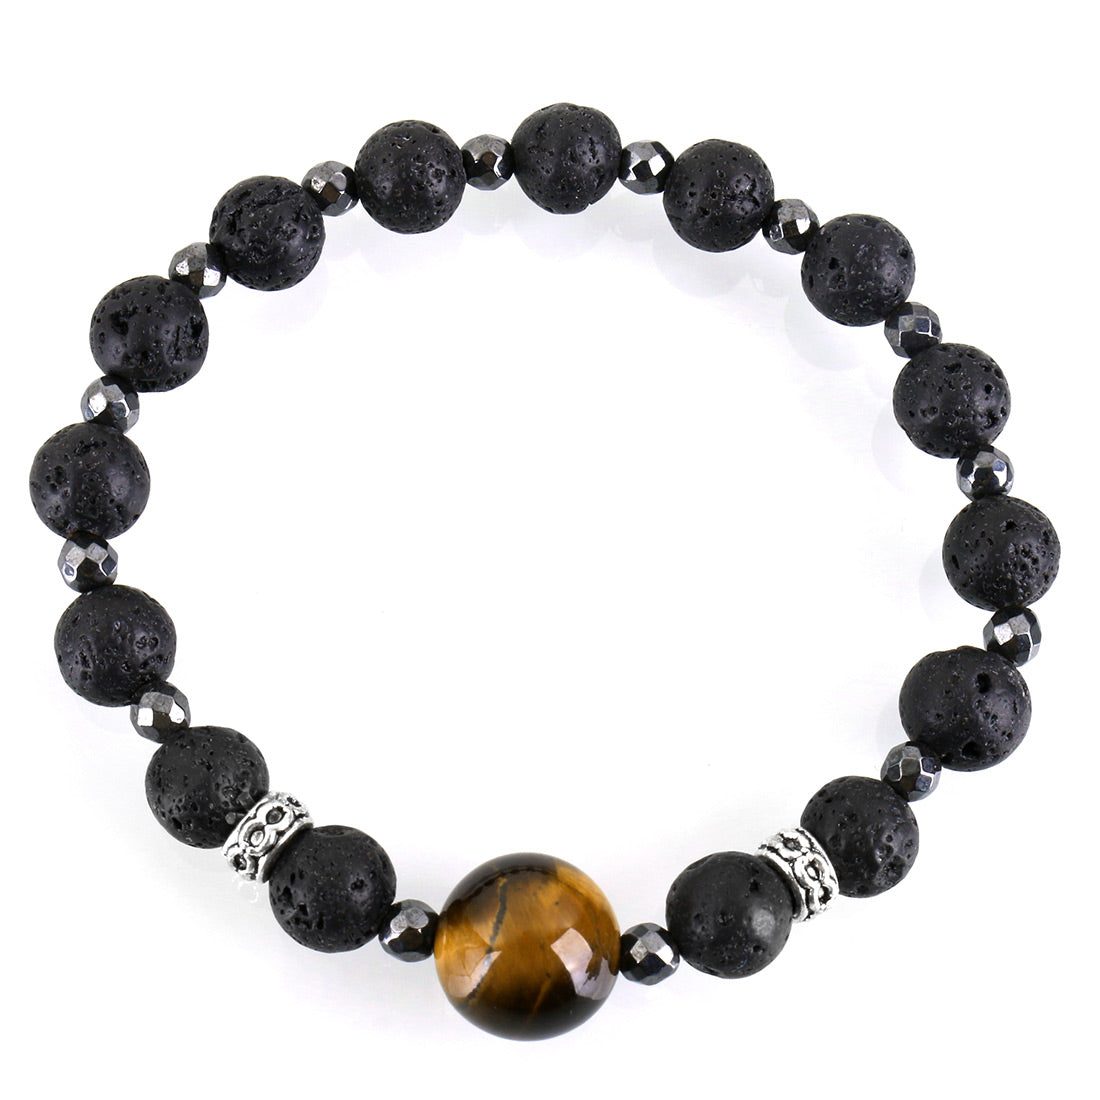 Lava Stone 8mm and 12mm Tiger's Eye Bracelet - Antique Silver Colour Plated Spacers